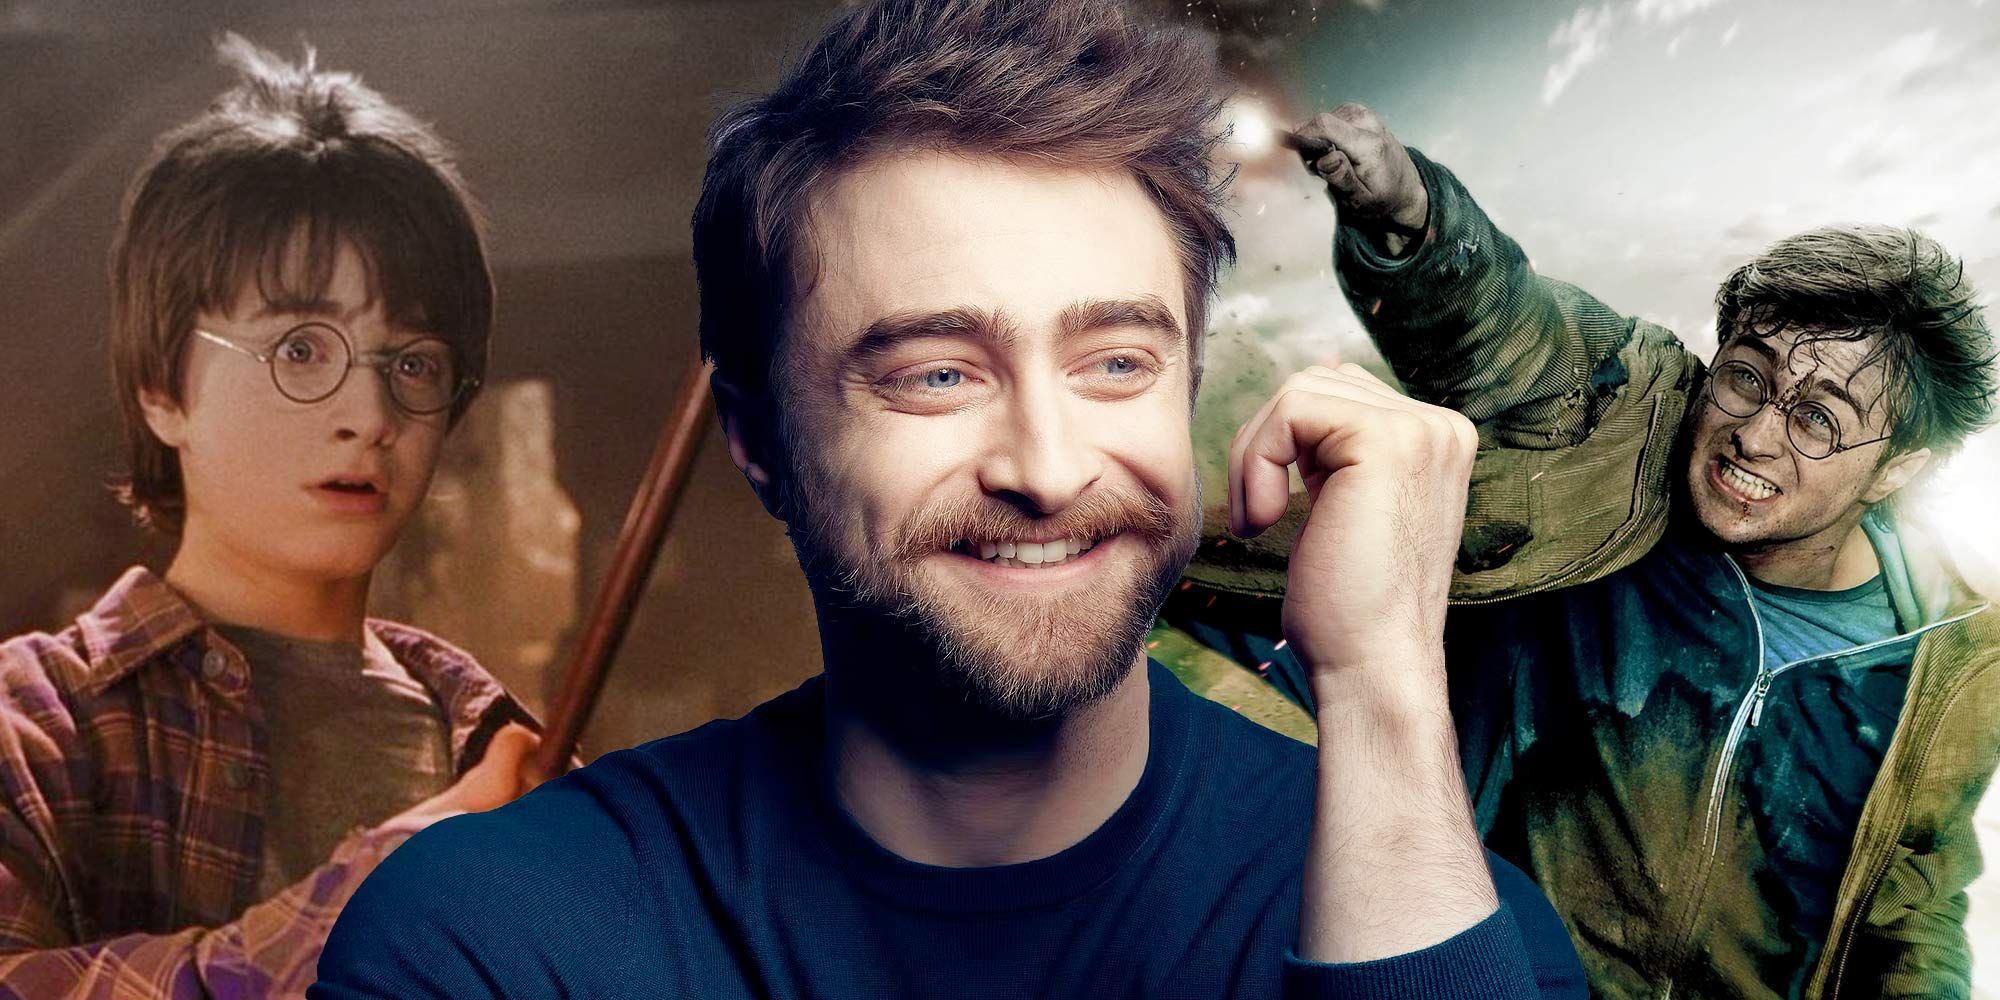 read-the-hilarious-reason-daniel-radcliffe-played-harry-potter-for-10-years-bestlightnovel-xyz